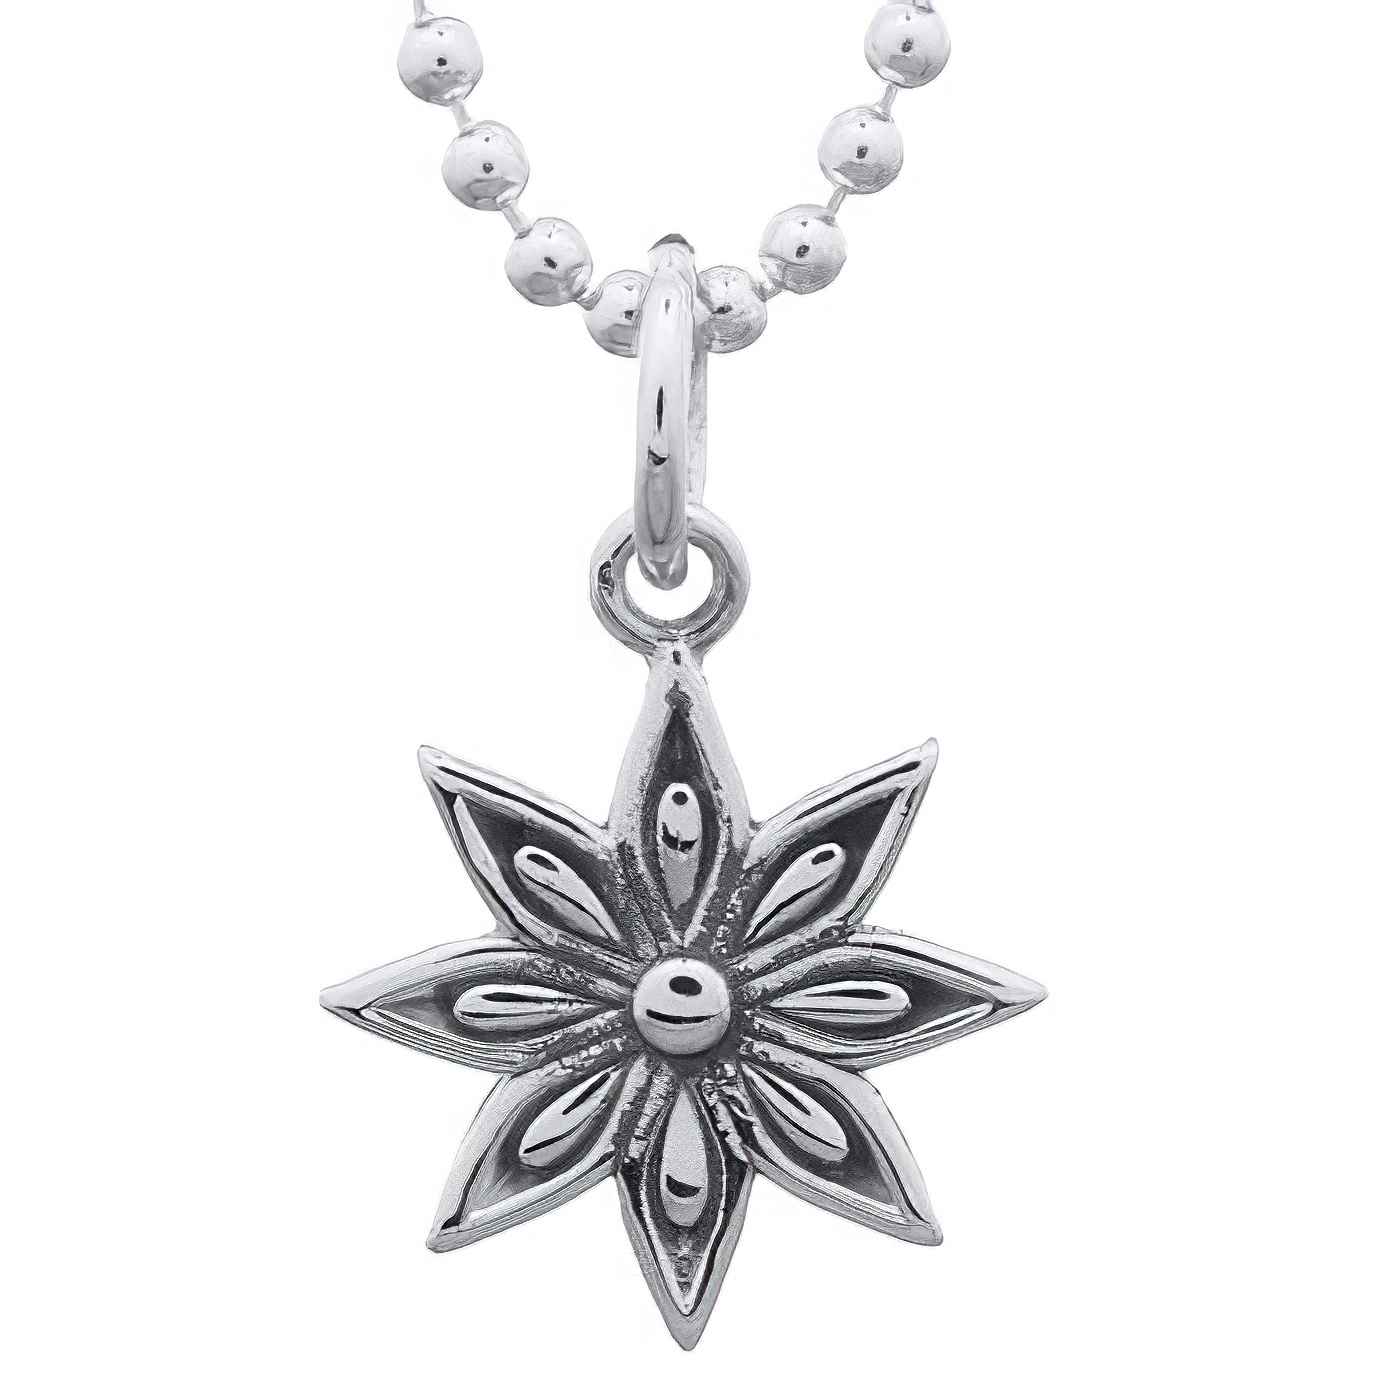 Pointed Eight Petal Flower Sterling Silver Pendant by BeYindi 